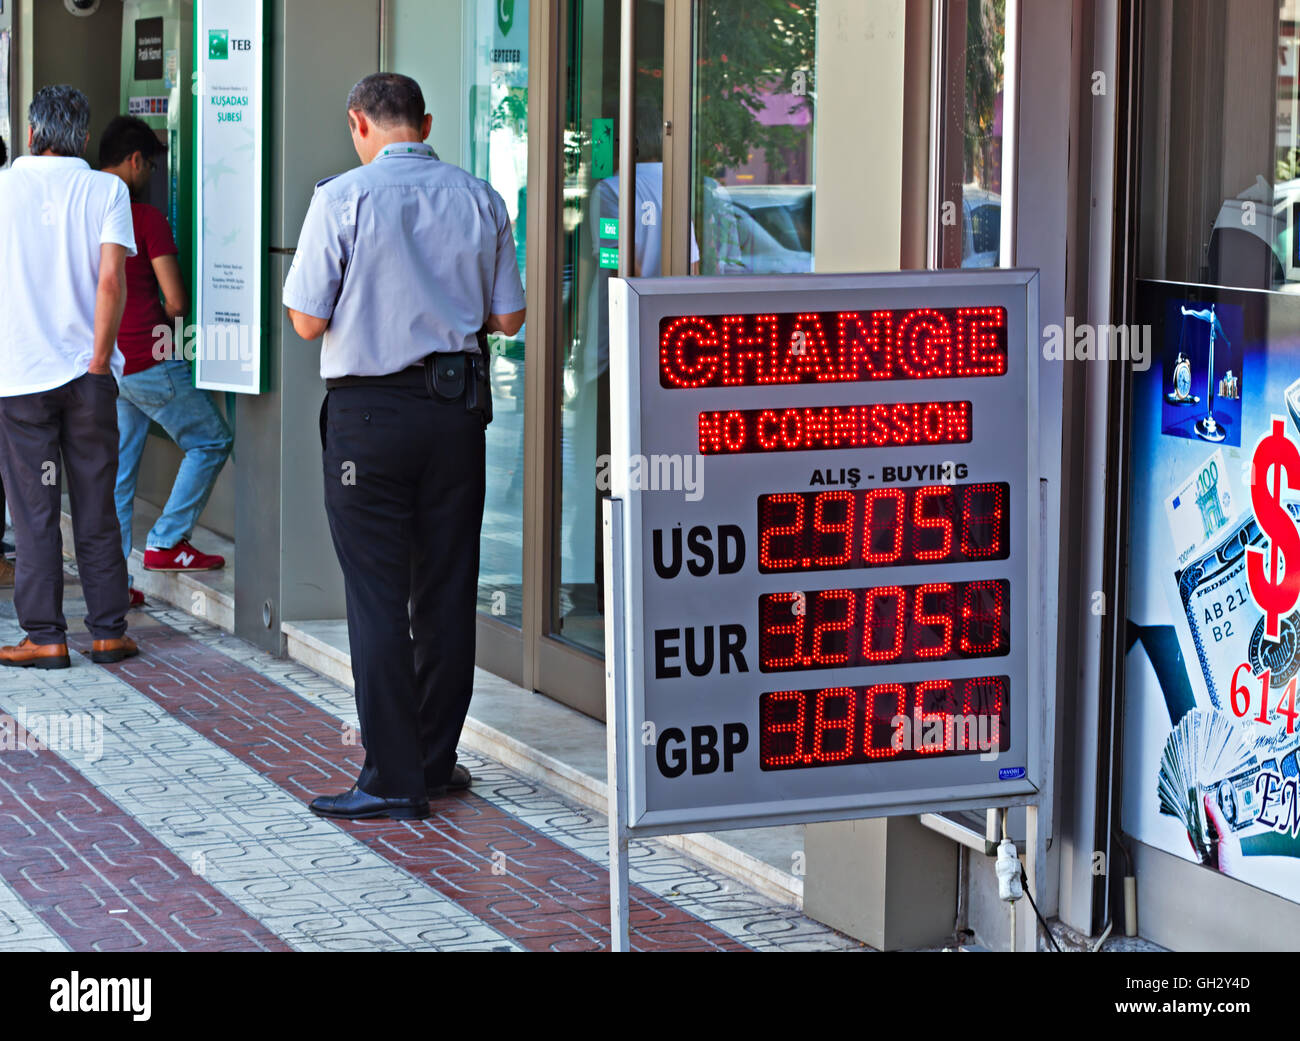 Currency exchange shop showing the rate for Turkish Lira in Kusadasi Turkey Stock Photo